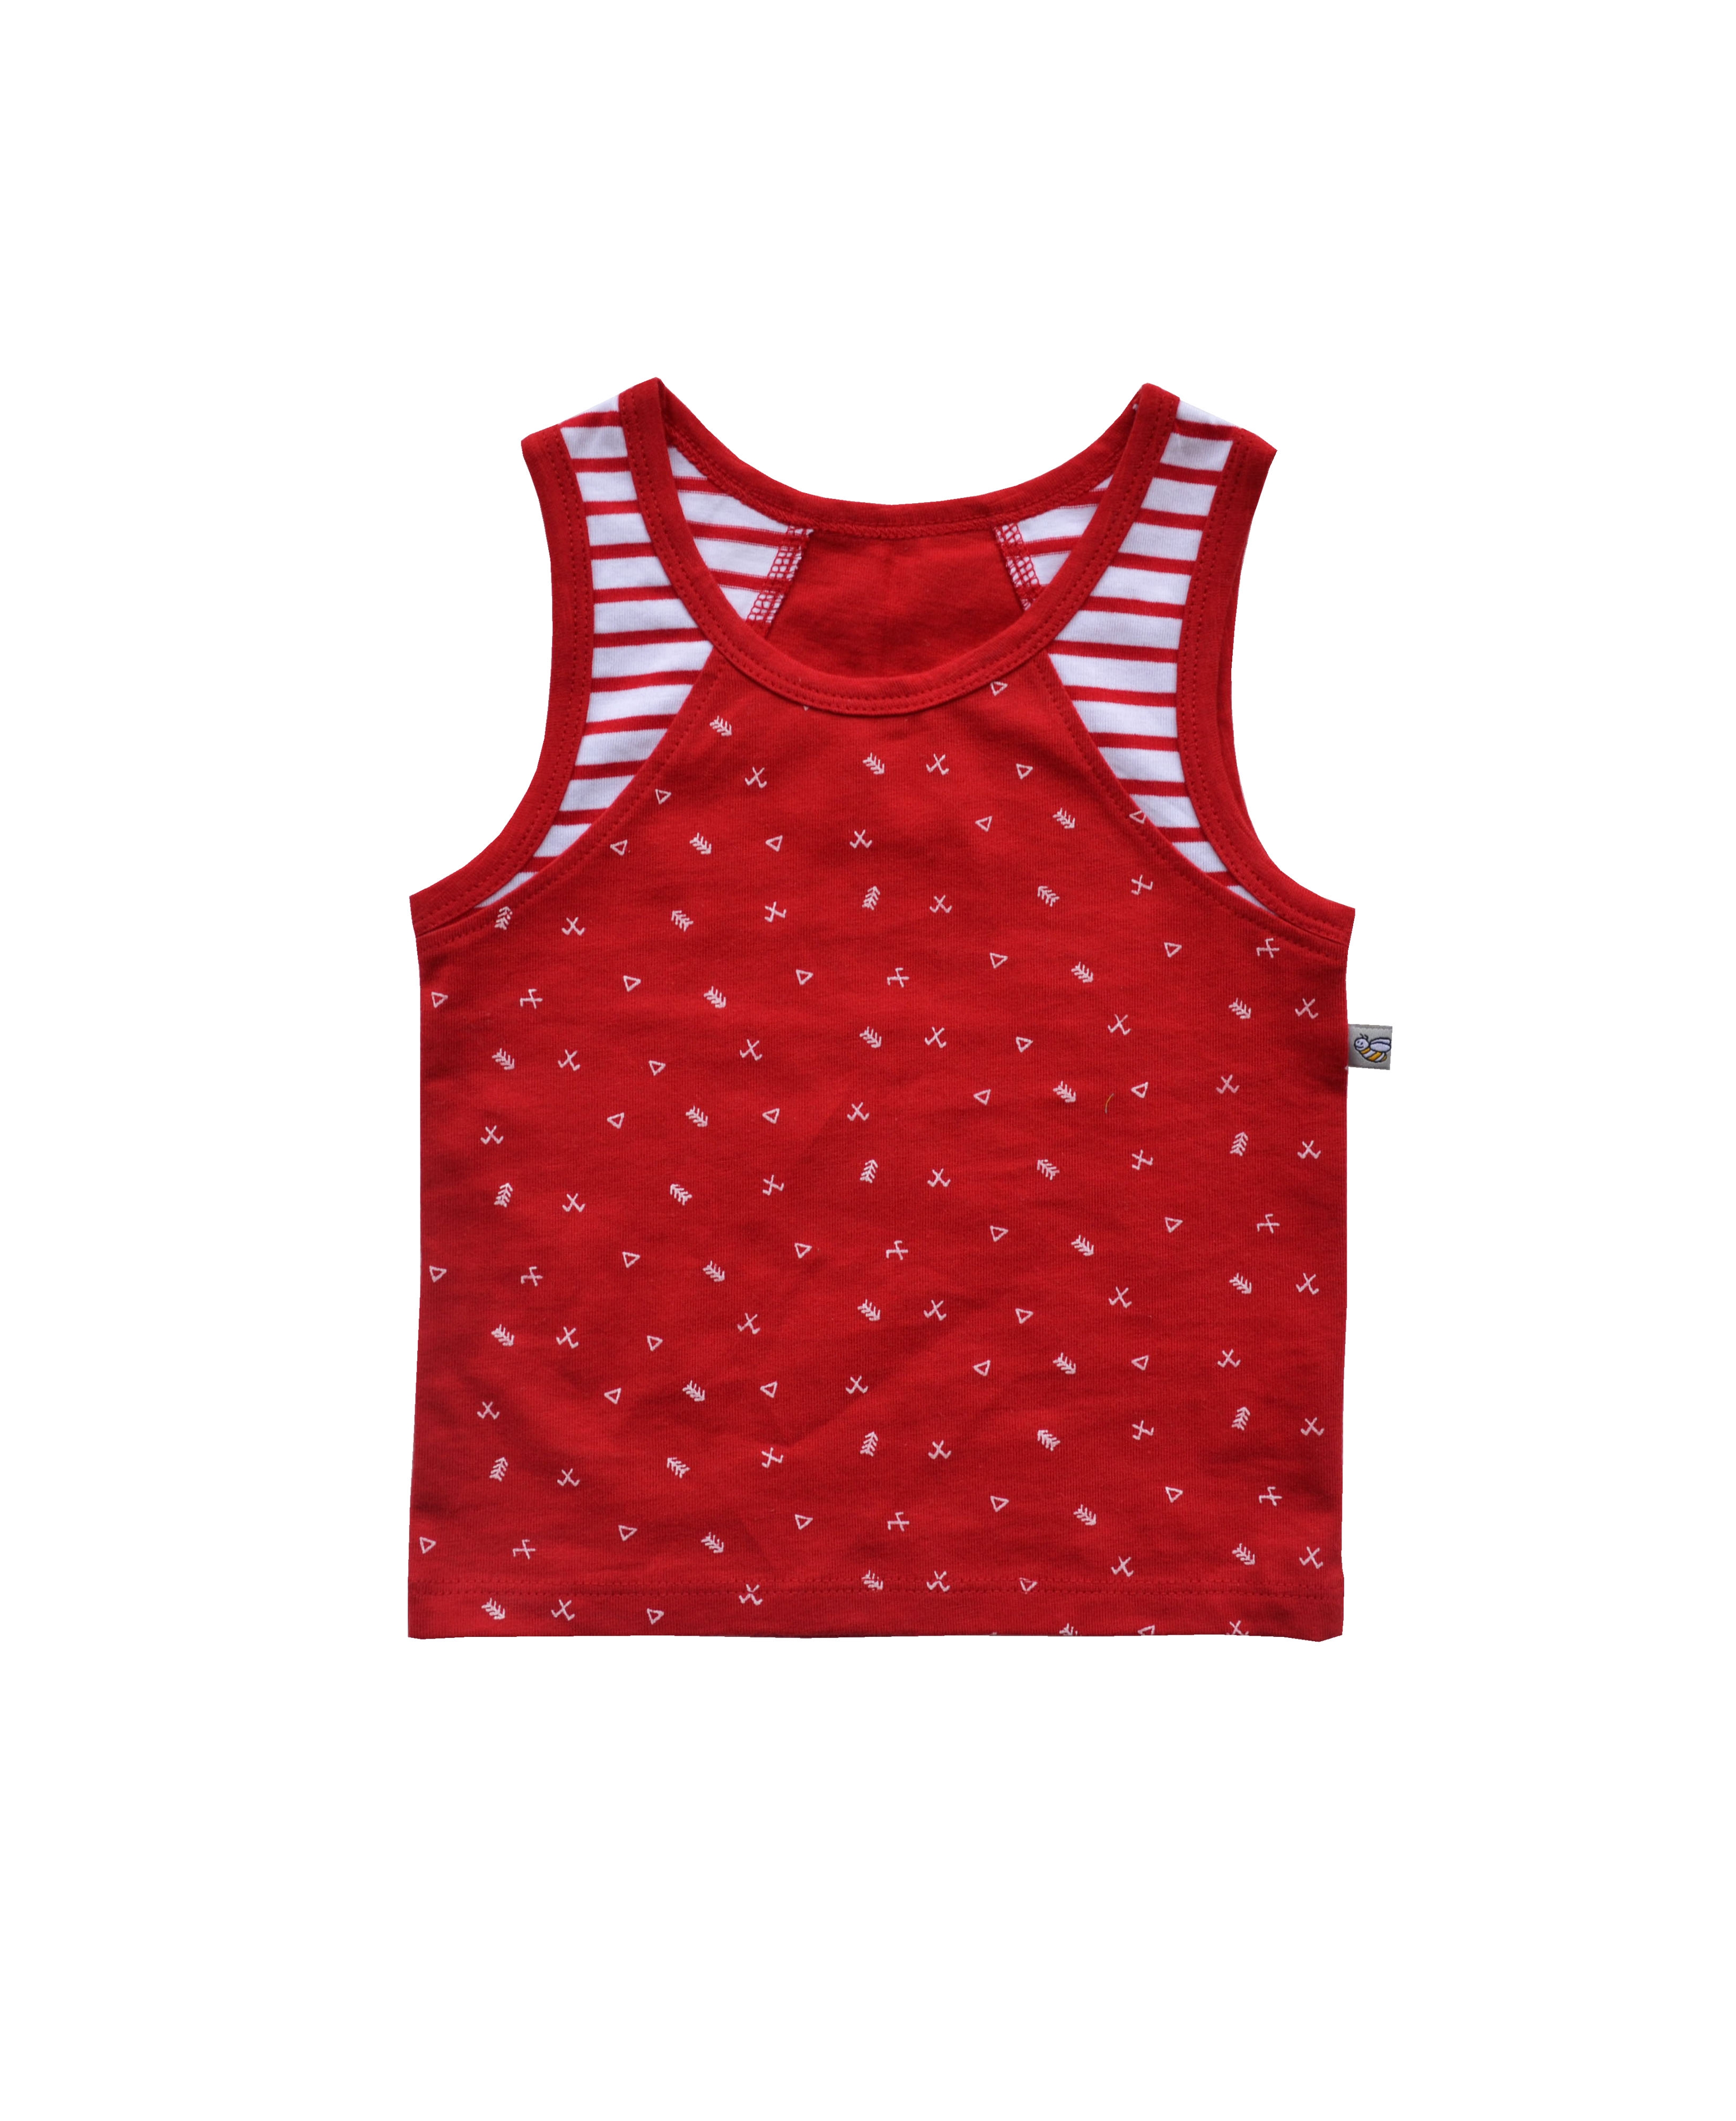 Babeez | Red Vest with stripes and small print (100% Cotton Single Jersey) undefined